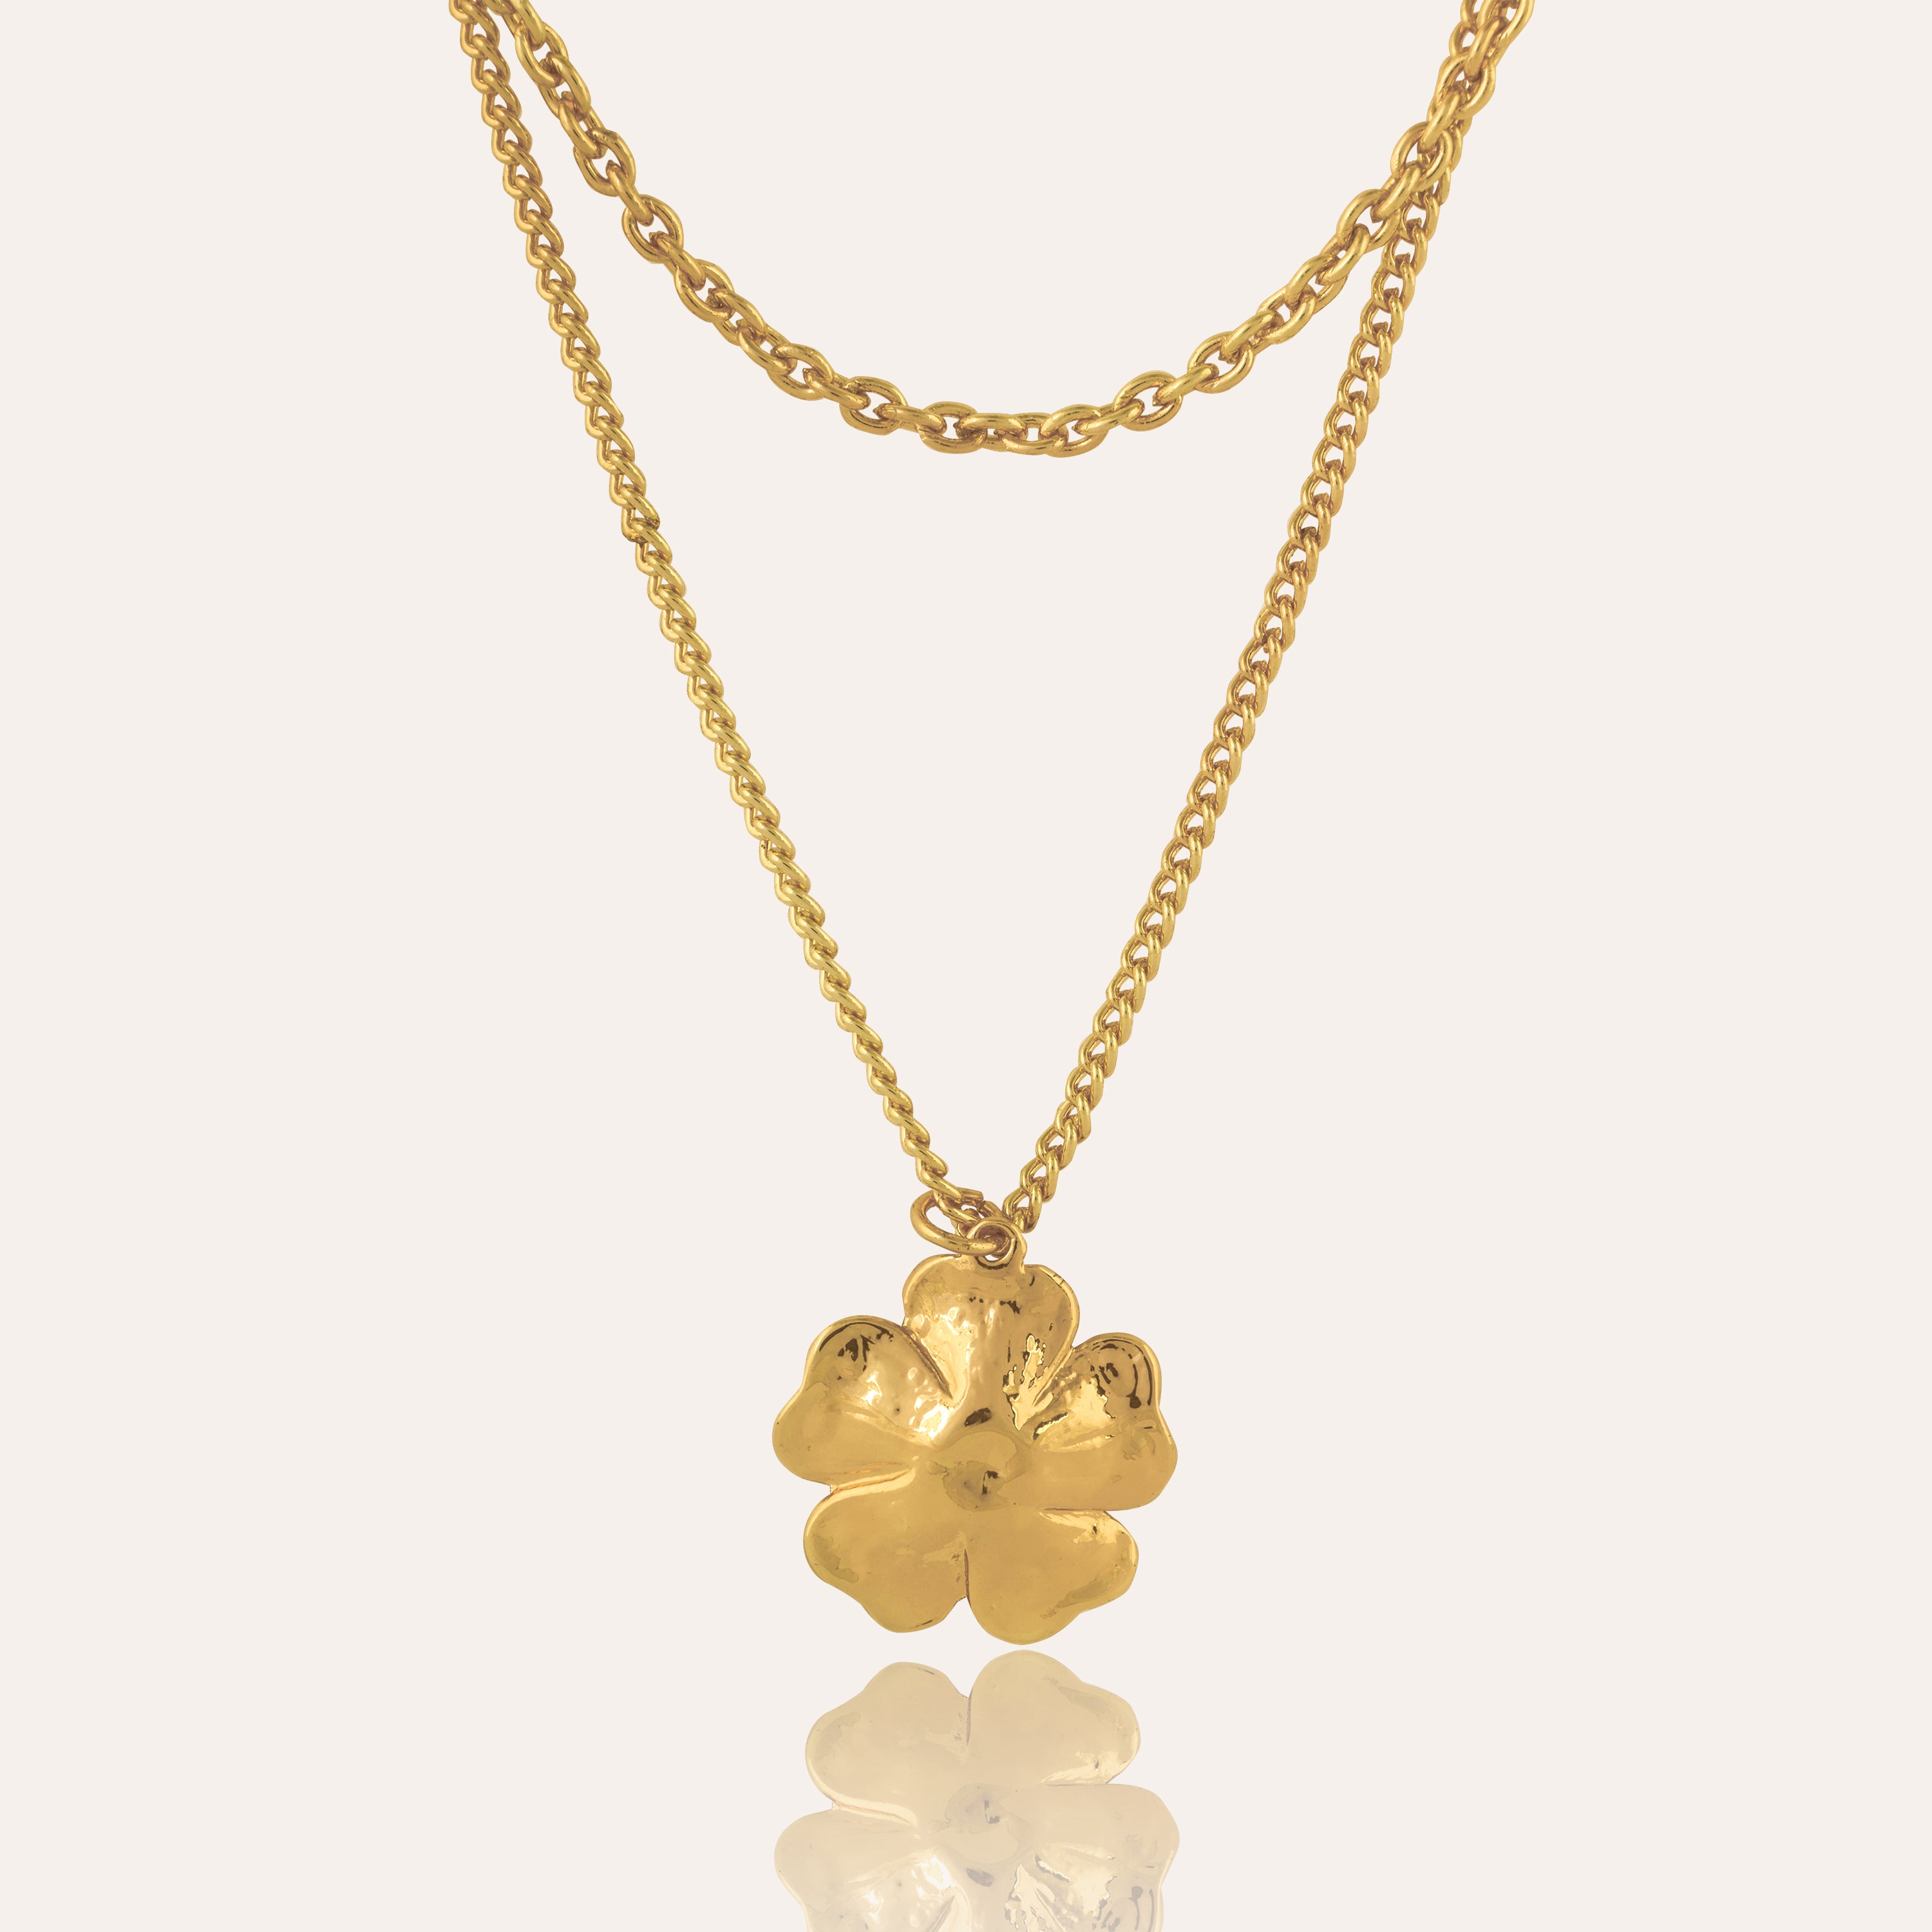 TFC Layered Chain Floral Gold Plated Necklace-Enhance your elegance with our collection of gold-plated necklaces for women. Choose from stunning pendant necklaces, chic choker necklaces, and trendy layered necklaces. Our sleek and dainty designs are both affordable and anti-tarnish, ensuring lasting beauty. Enjoy the cheapest fashion jewellery, lightweight and stylish- only at The Fun Company